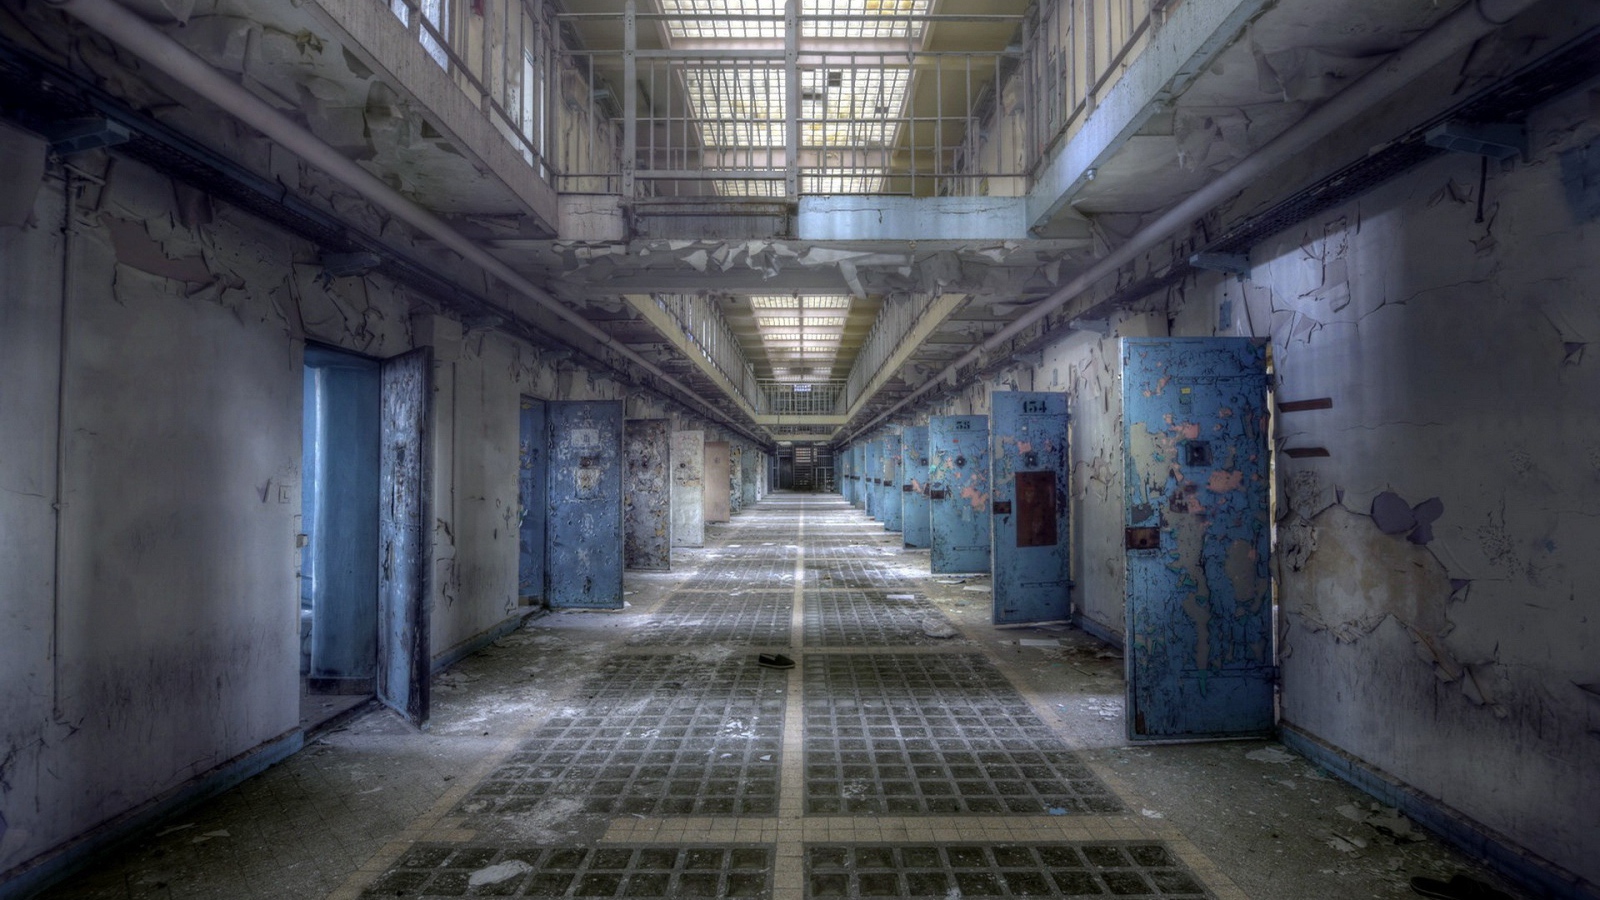 The interior of an abandoned prison